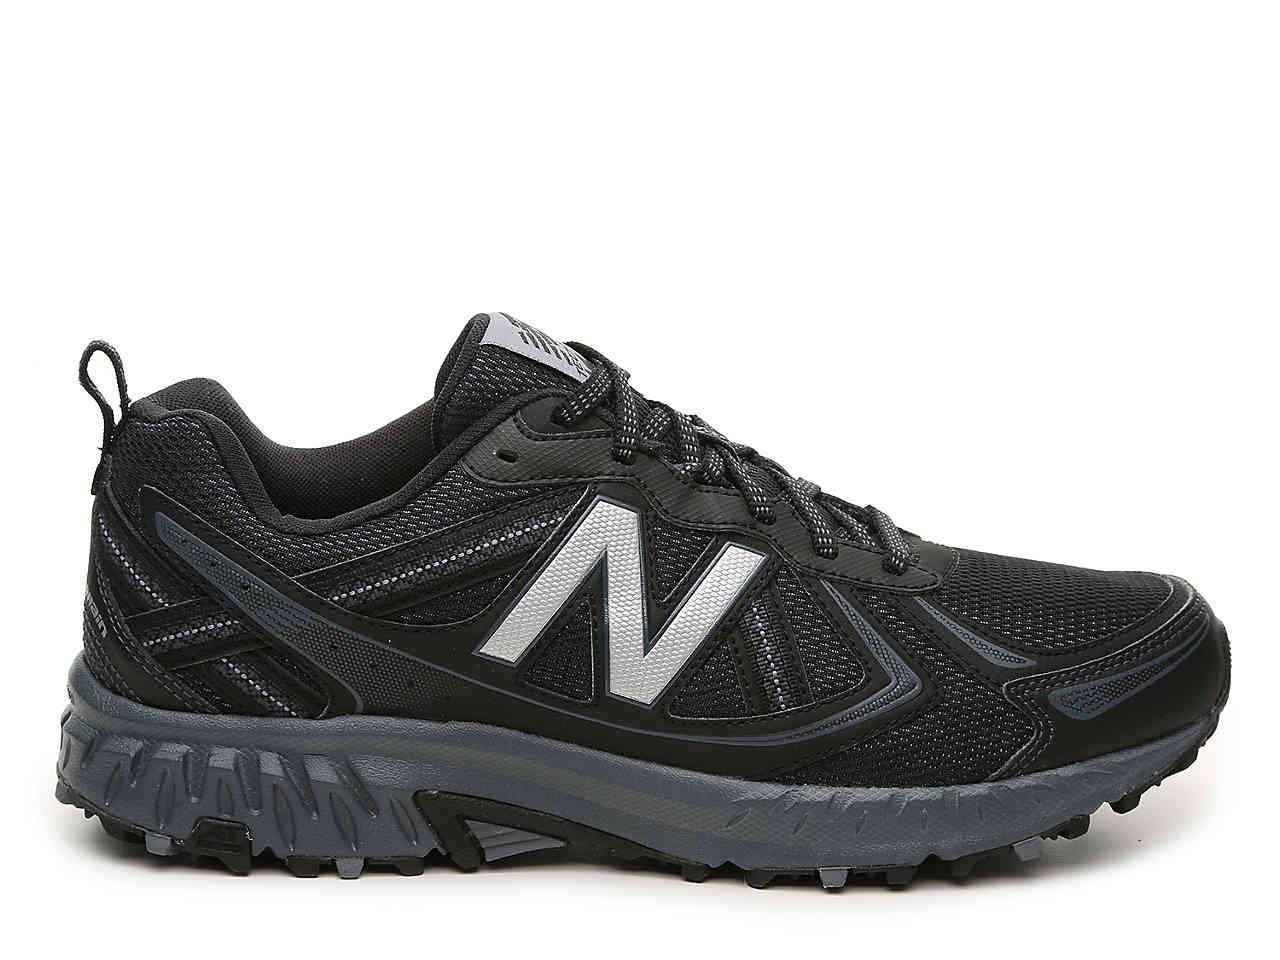 New Balance Synthetic 410 V5 Trail Running Shoe in Black/Grey (Black ...